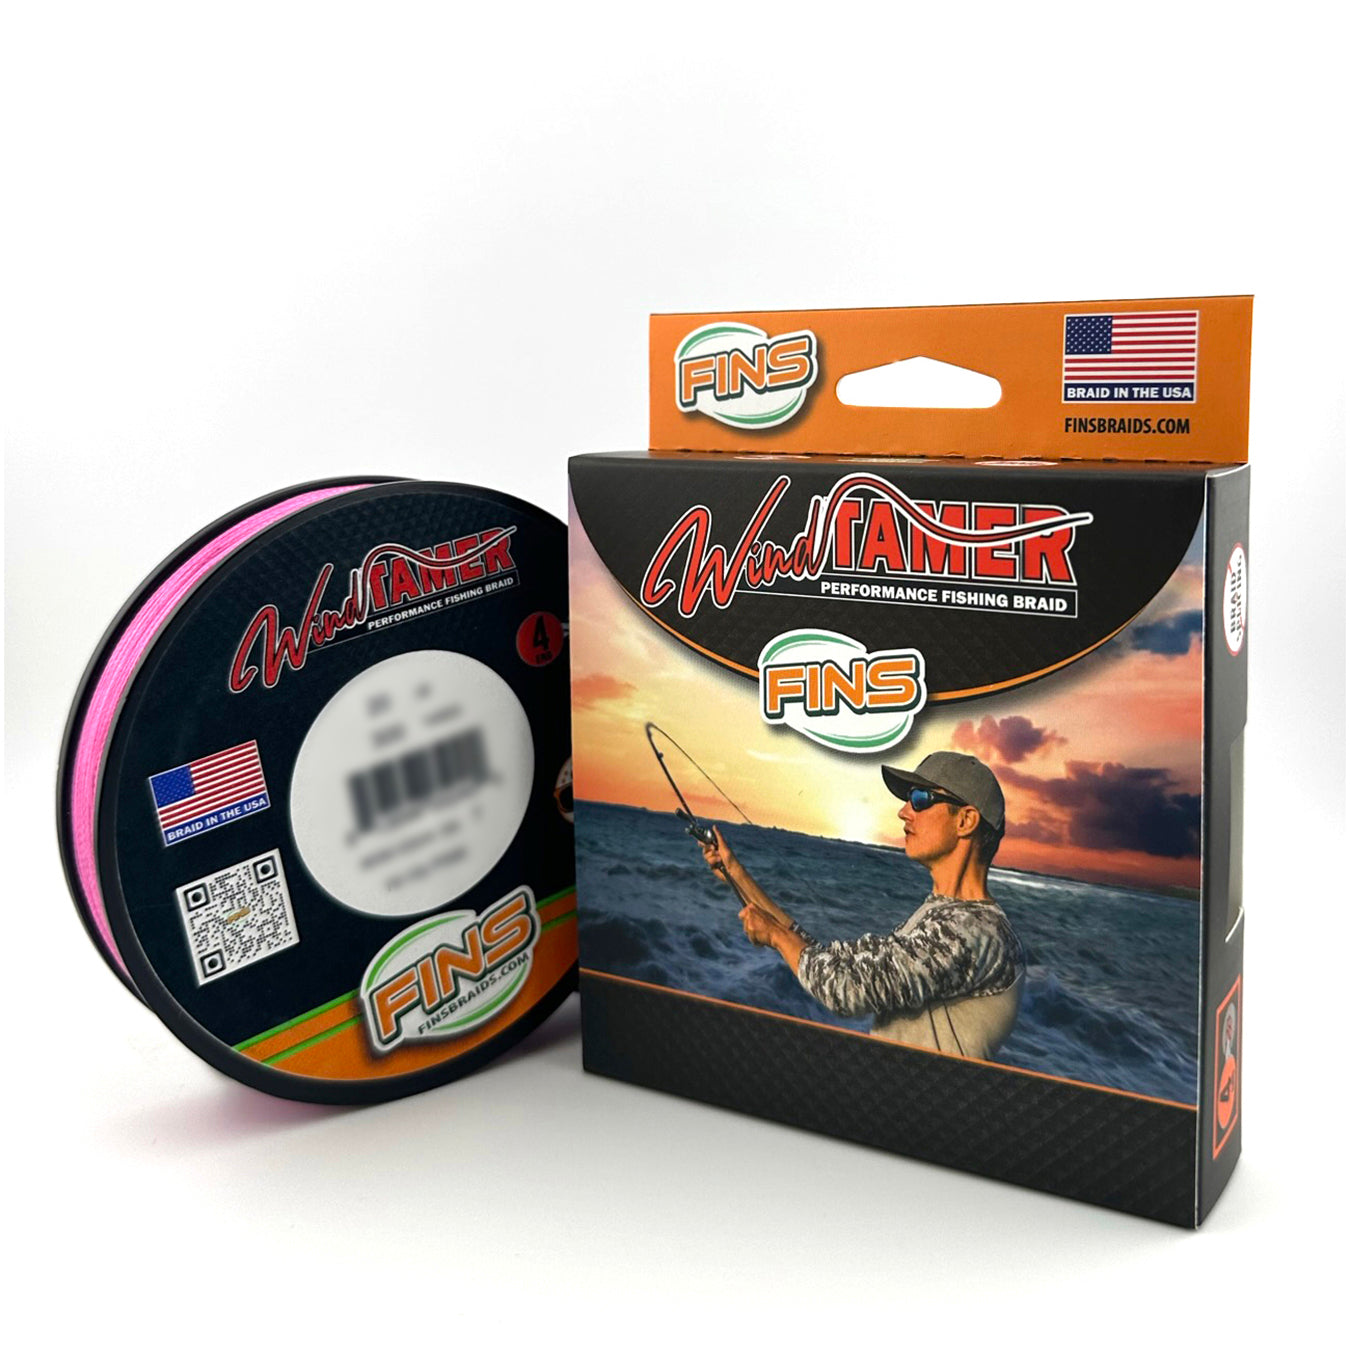 Bright Pink spool and box  braided fishing line Windtamer by Fins